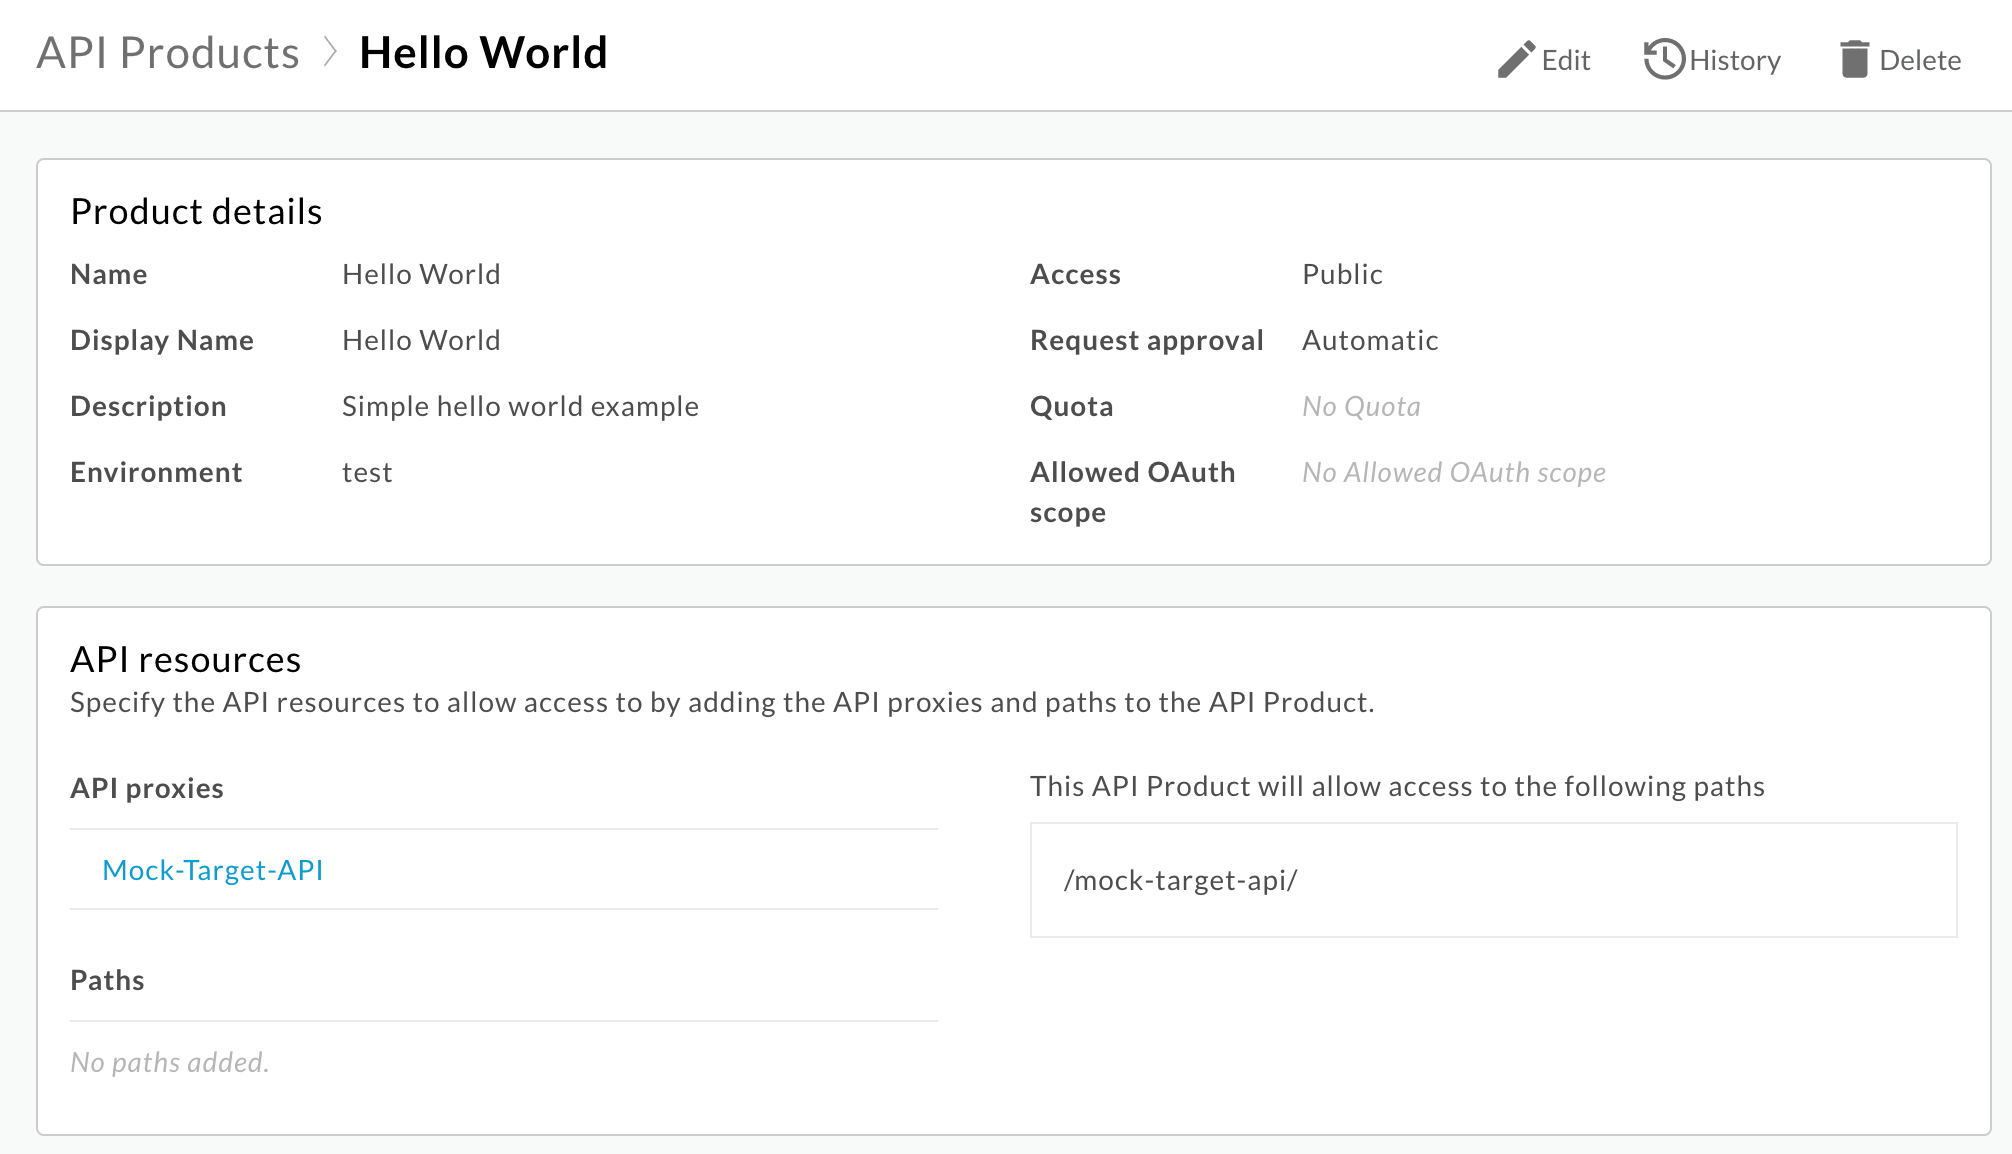 Hello World API product showing all fields set